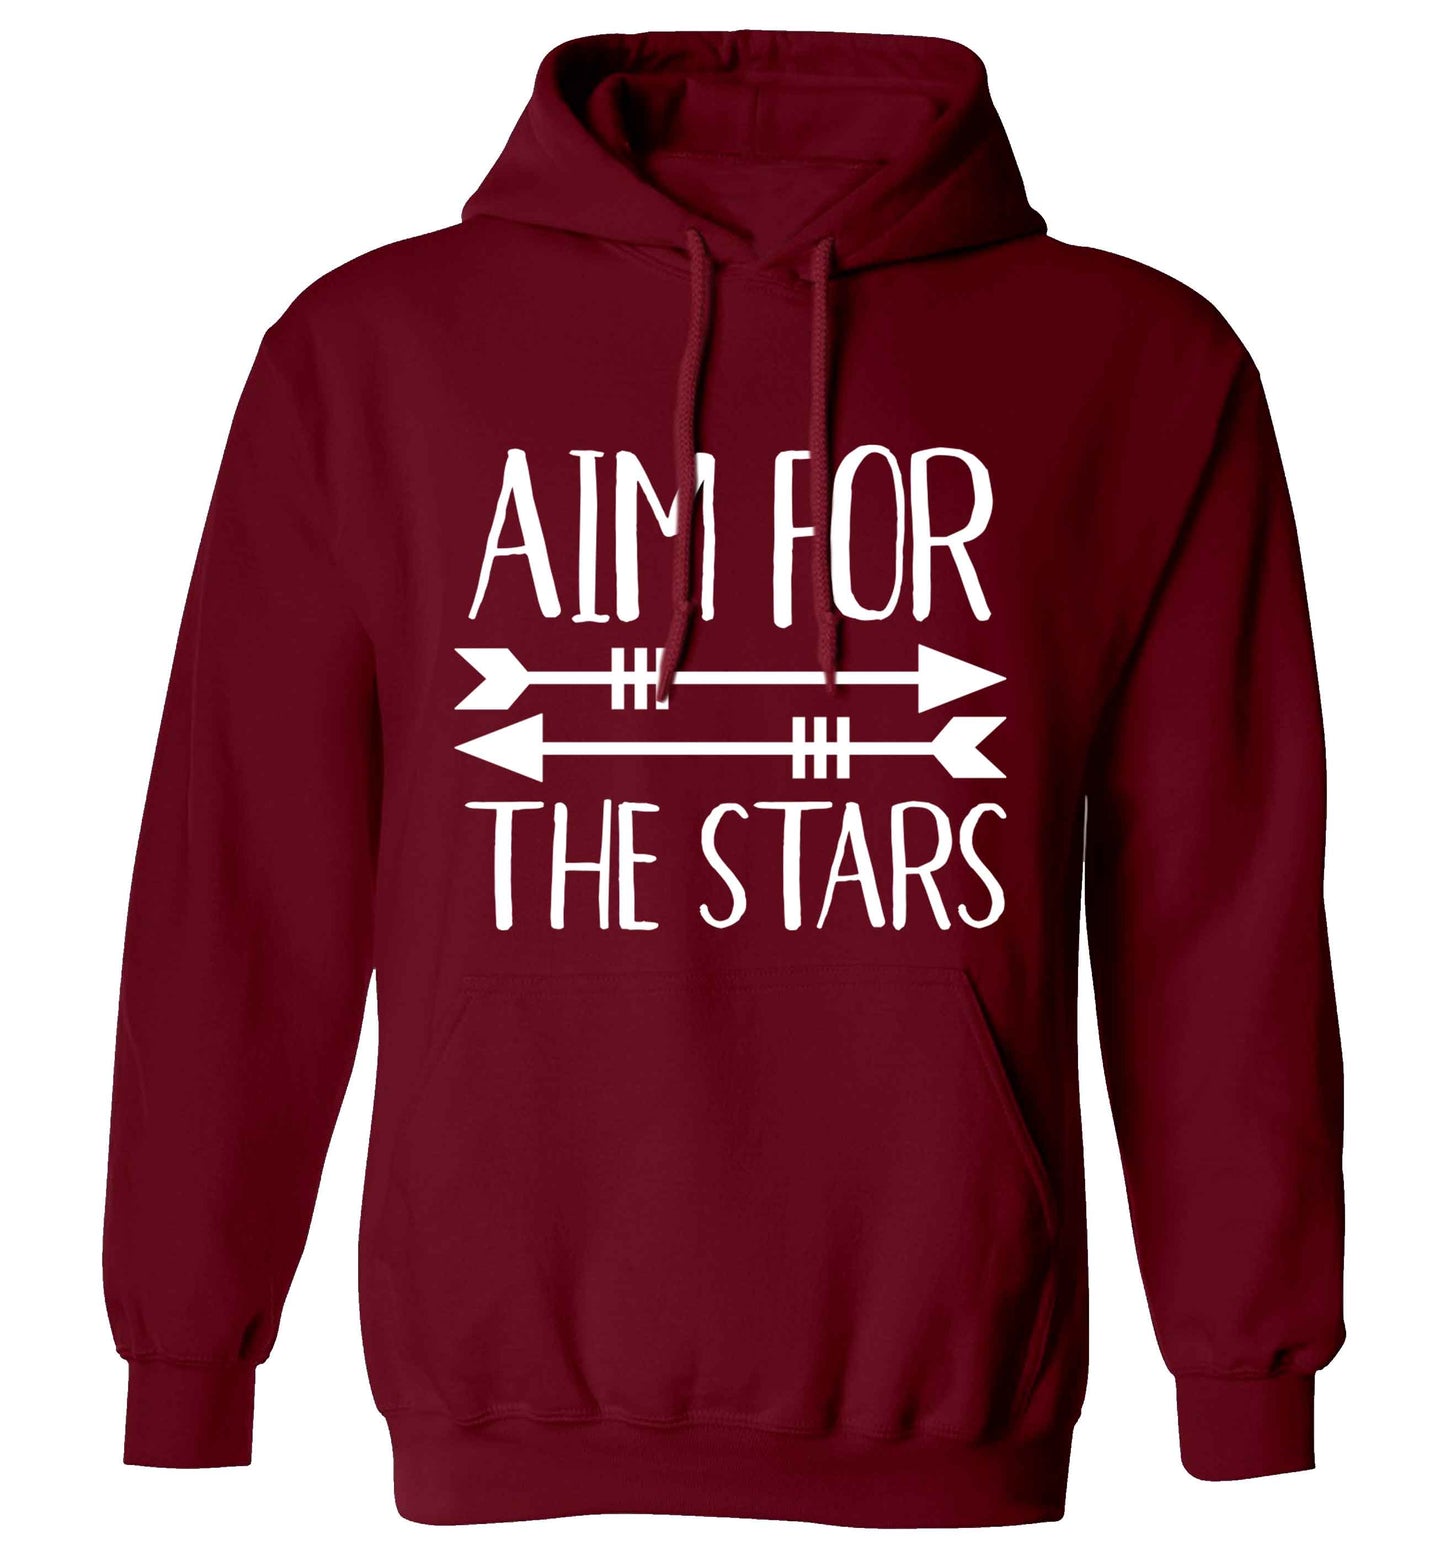 Aim for the stars adults unisex maroon hoodie 2XL